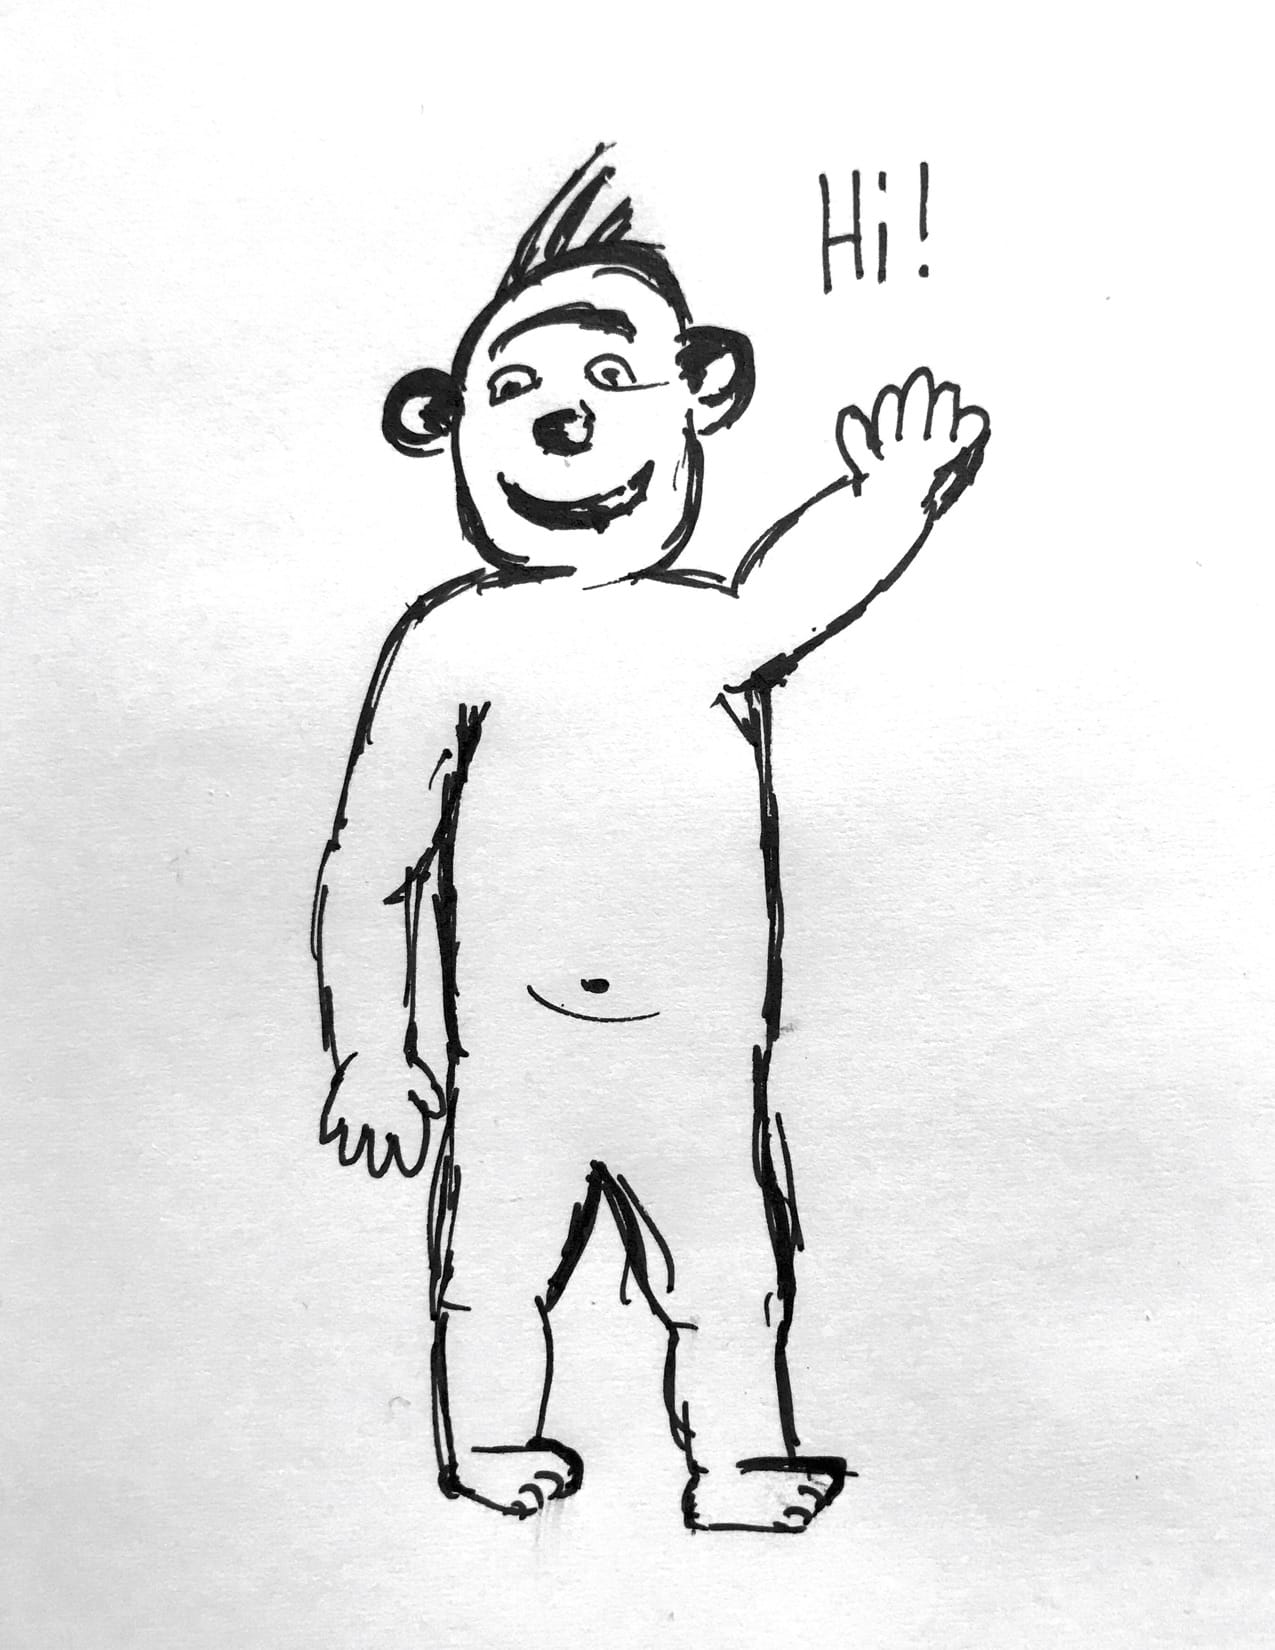 Sketch / comic drawing of a imaginary bear / Yeti / something similar with a waving hand and friendly face